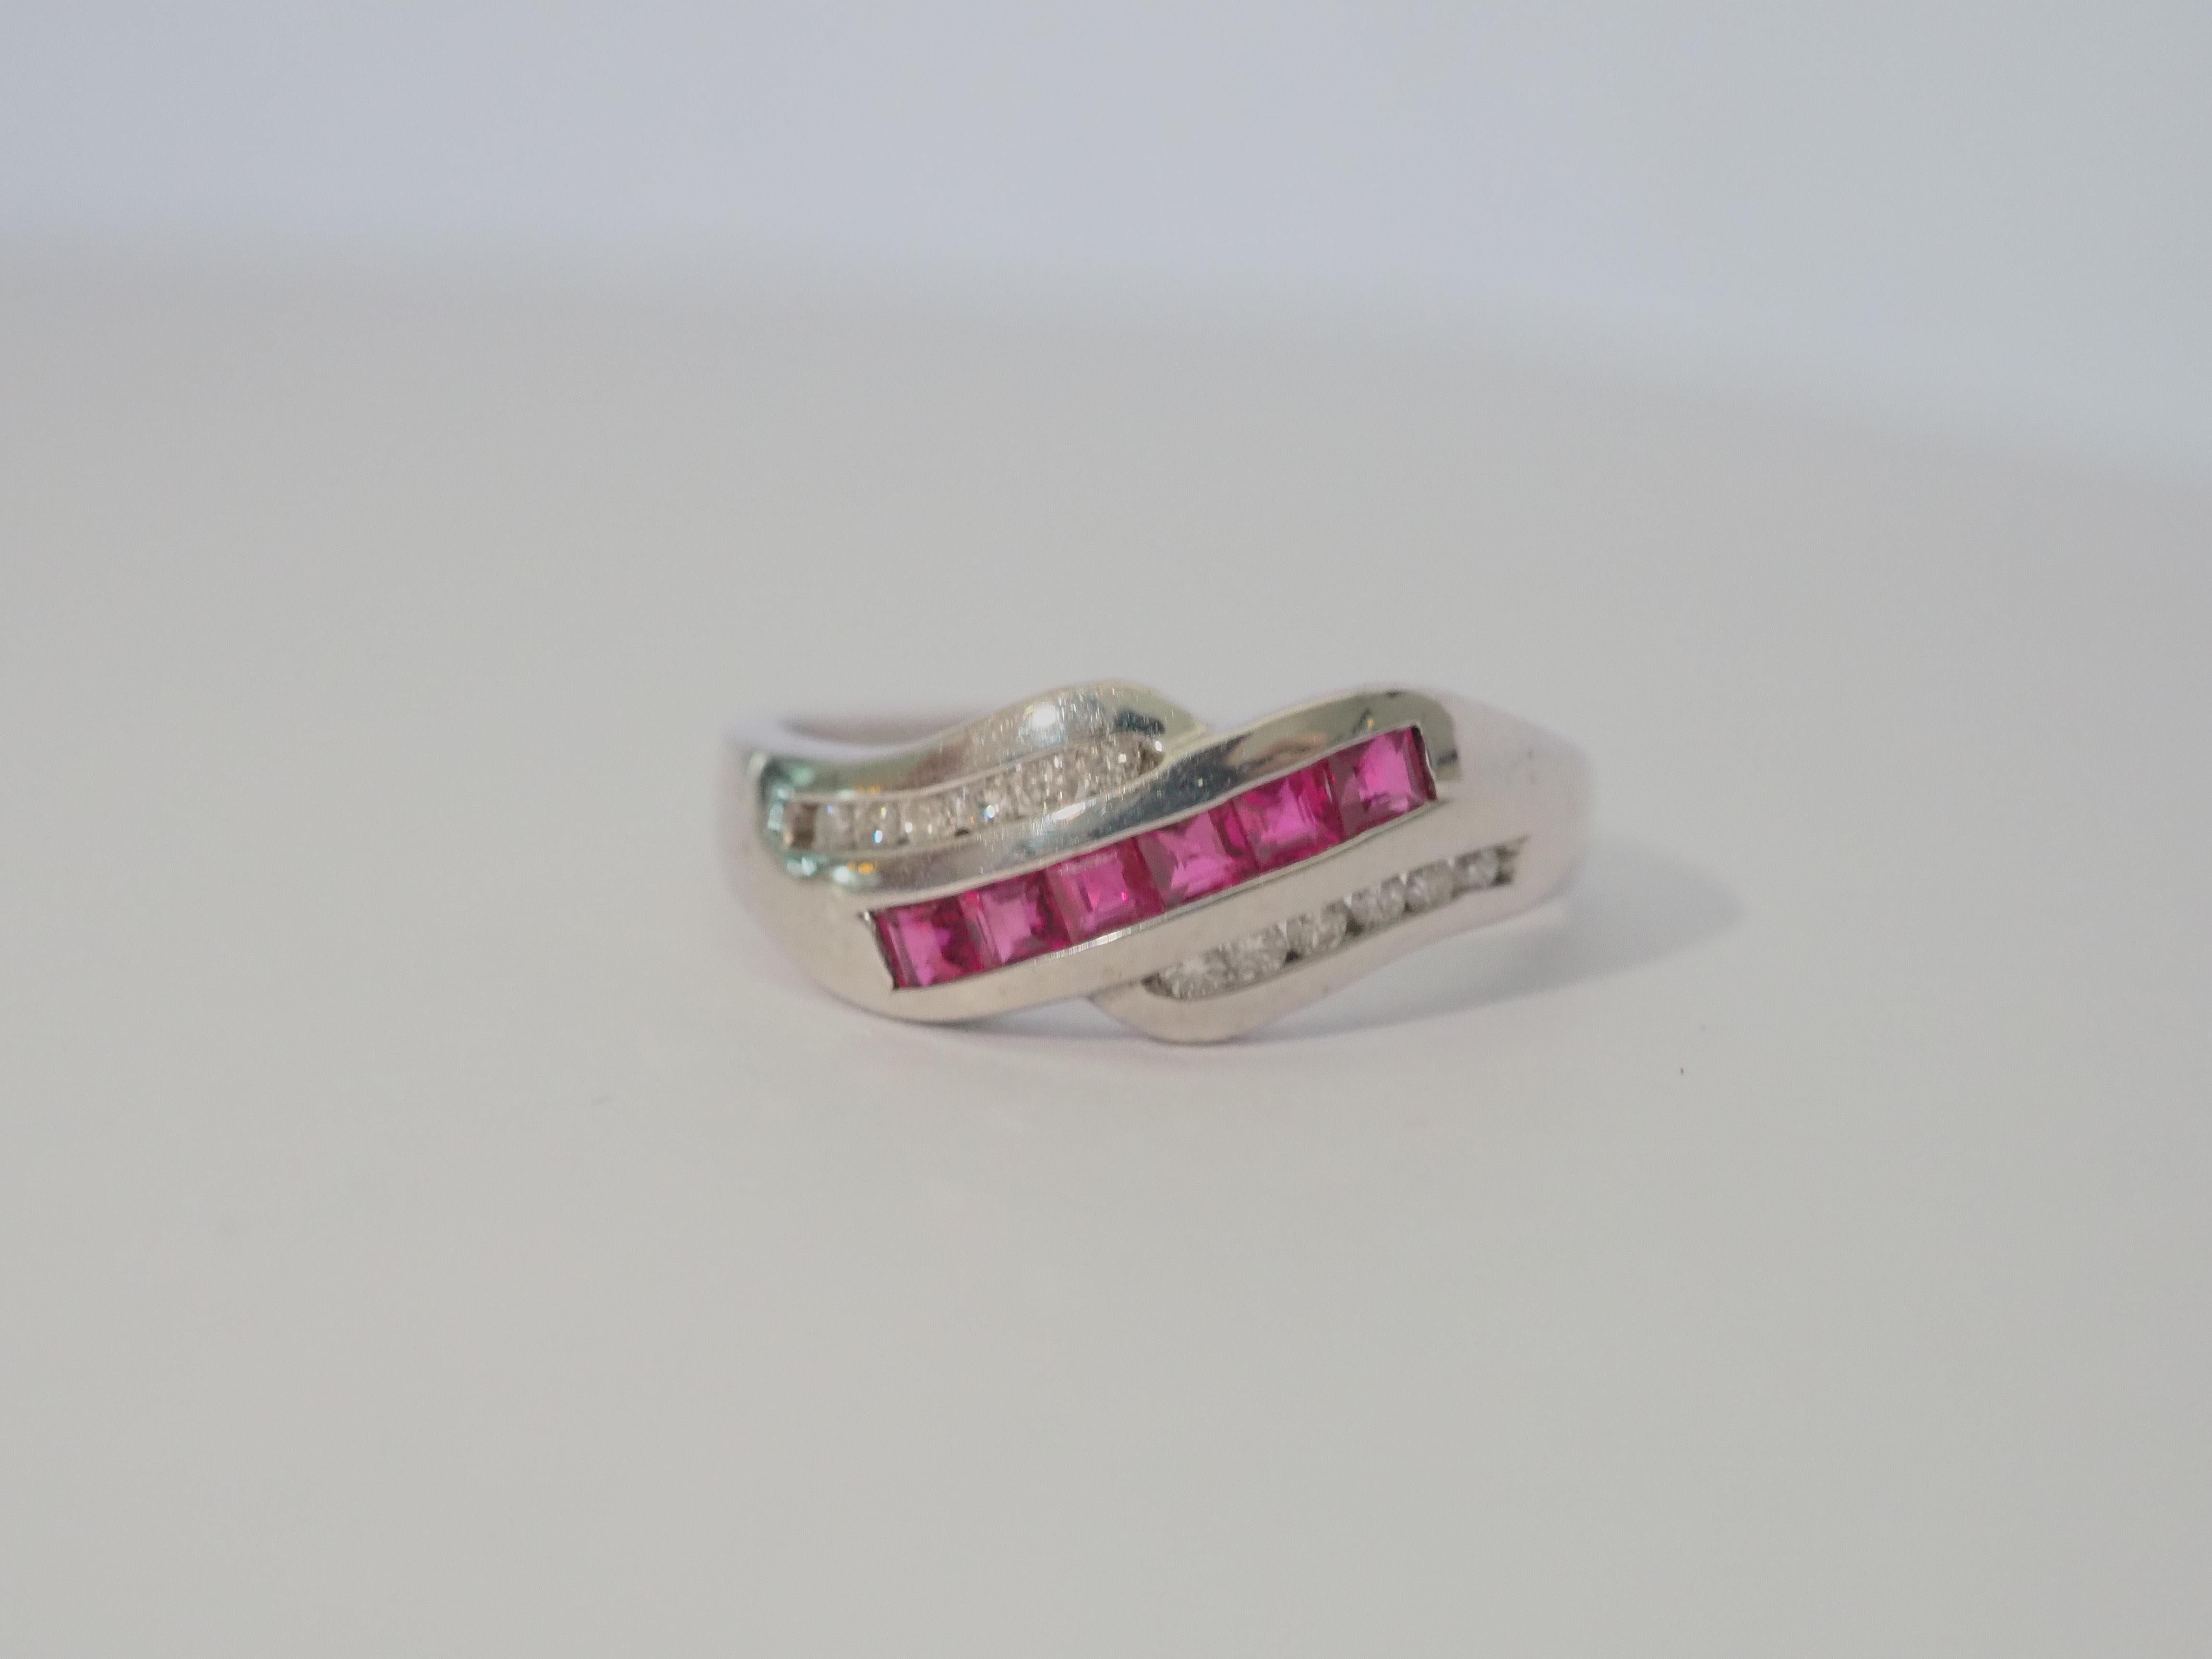 A gorgeous luxury wavy band ring that is both suitable for all sexes. This ring has a total of 6 of beautiful Thai rubies and pave round diamonds channeled nicely into the band. The square cut rubies have a beautiful pinkish red hue. And the 12